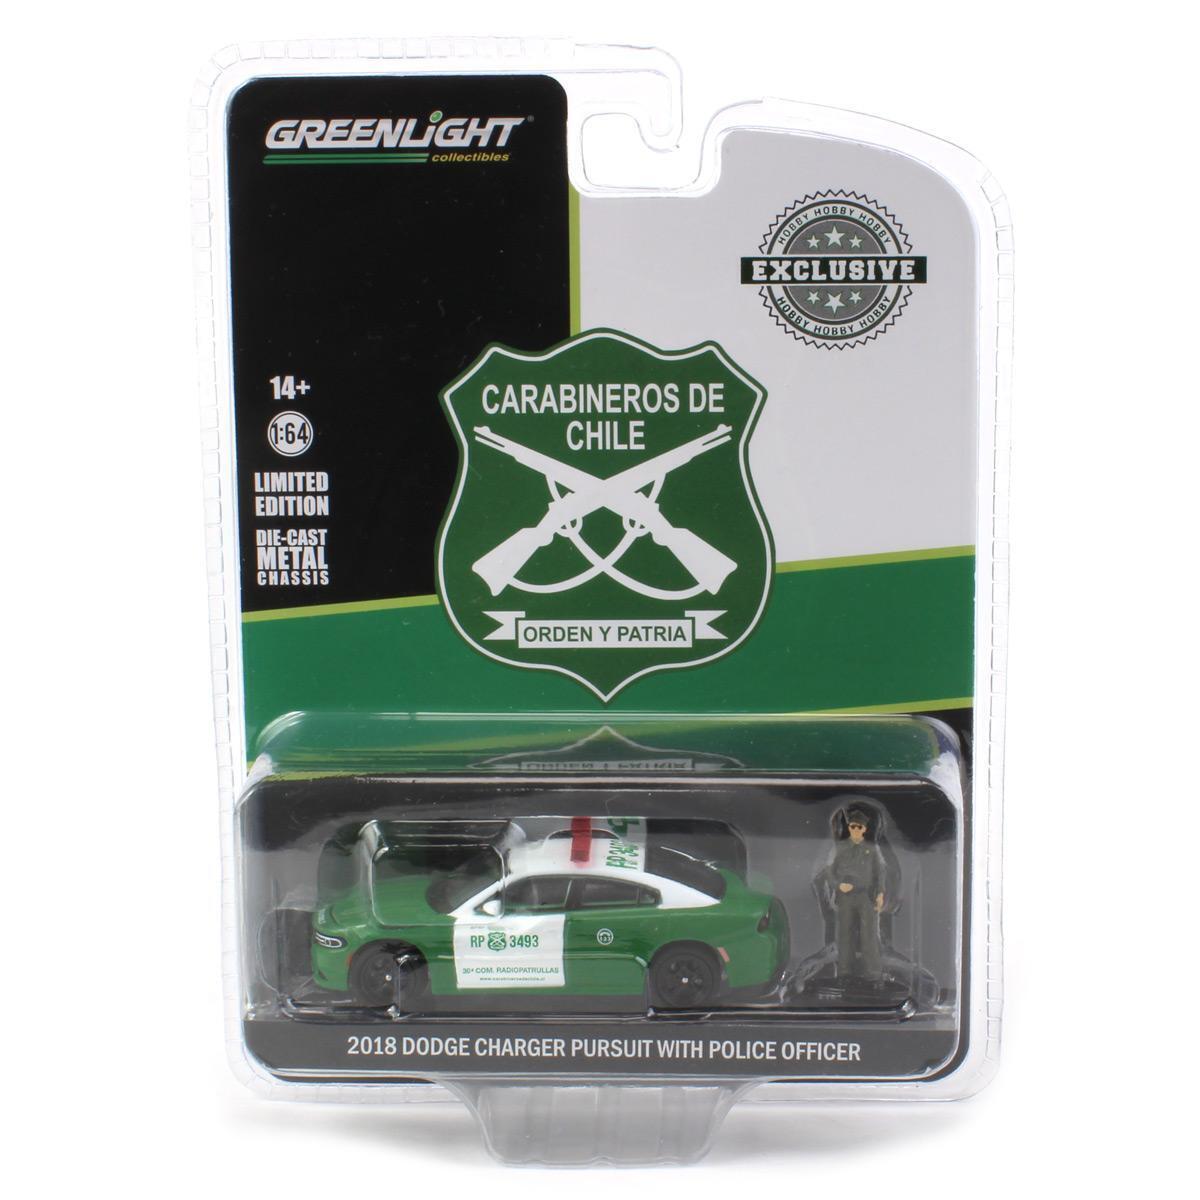 GreenLight 1:64 2018 Dodge Charger Pursuit - Carabineros de Chile with Carabineros de Chile Police Figure 30459